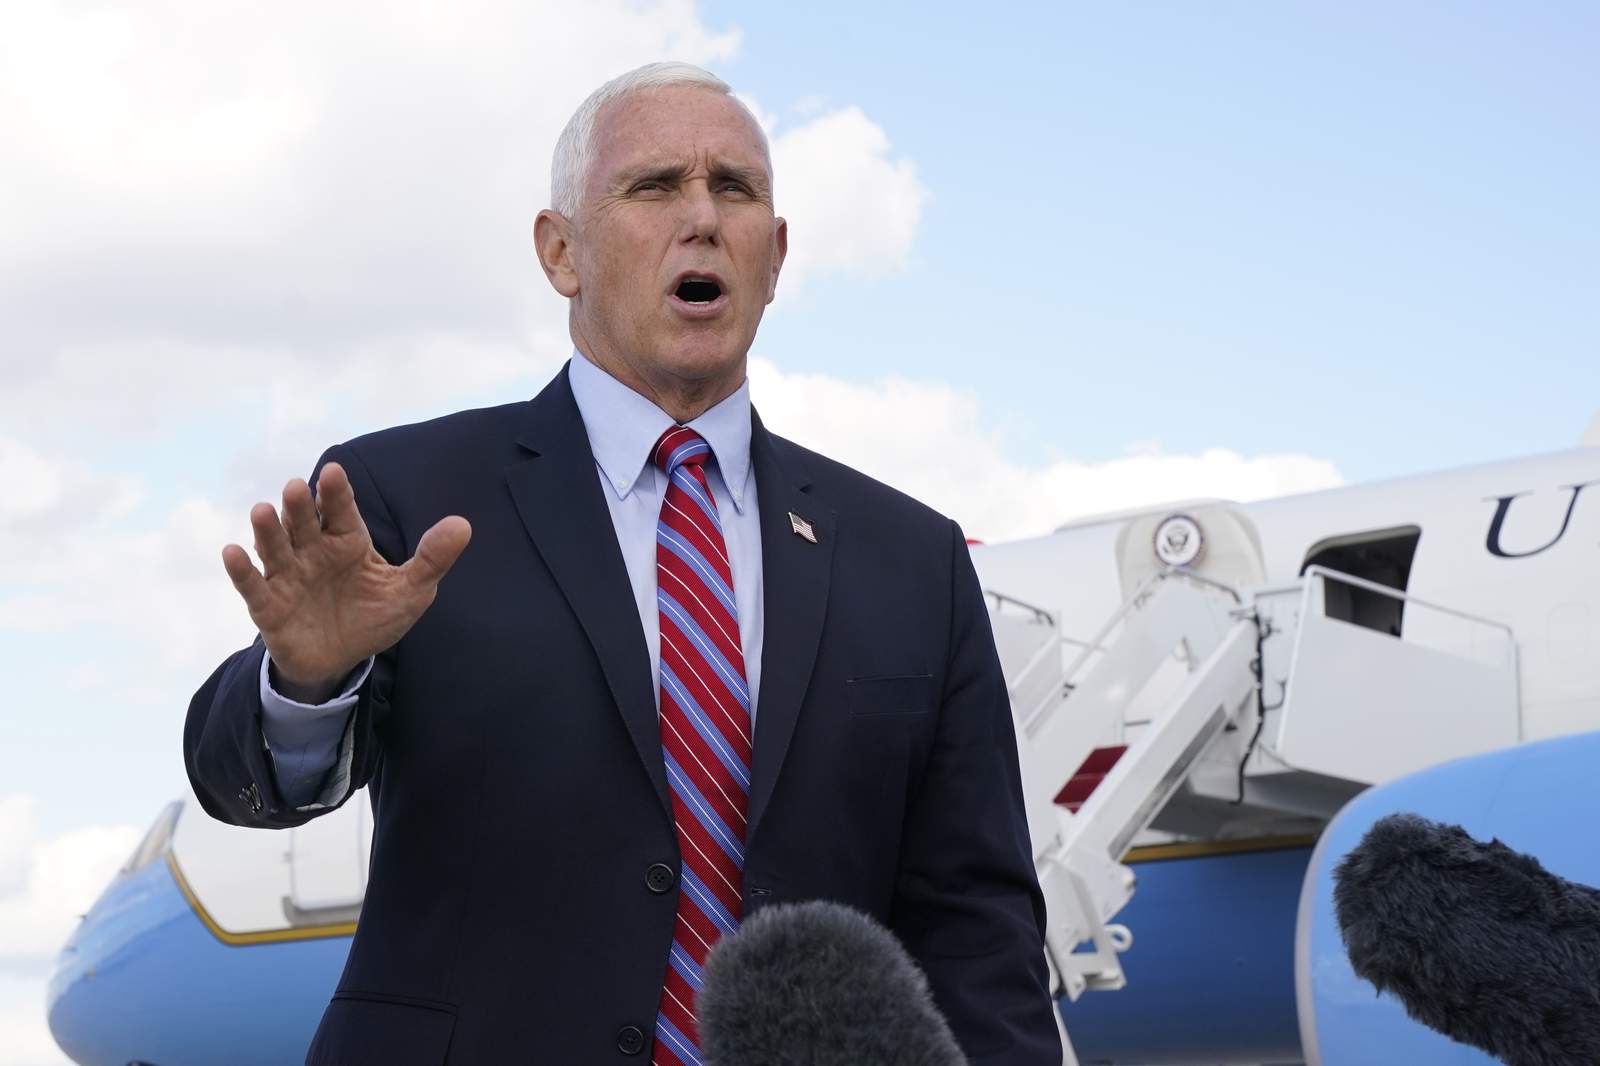 Pence takes lead role in campaign with Trump travel stopped